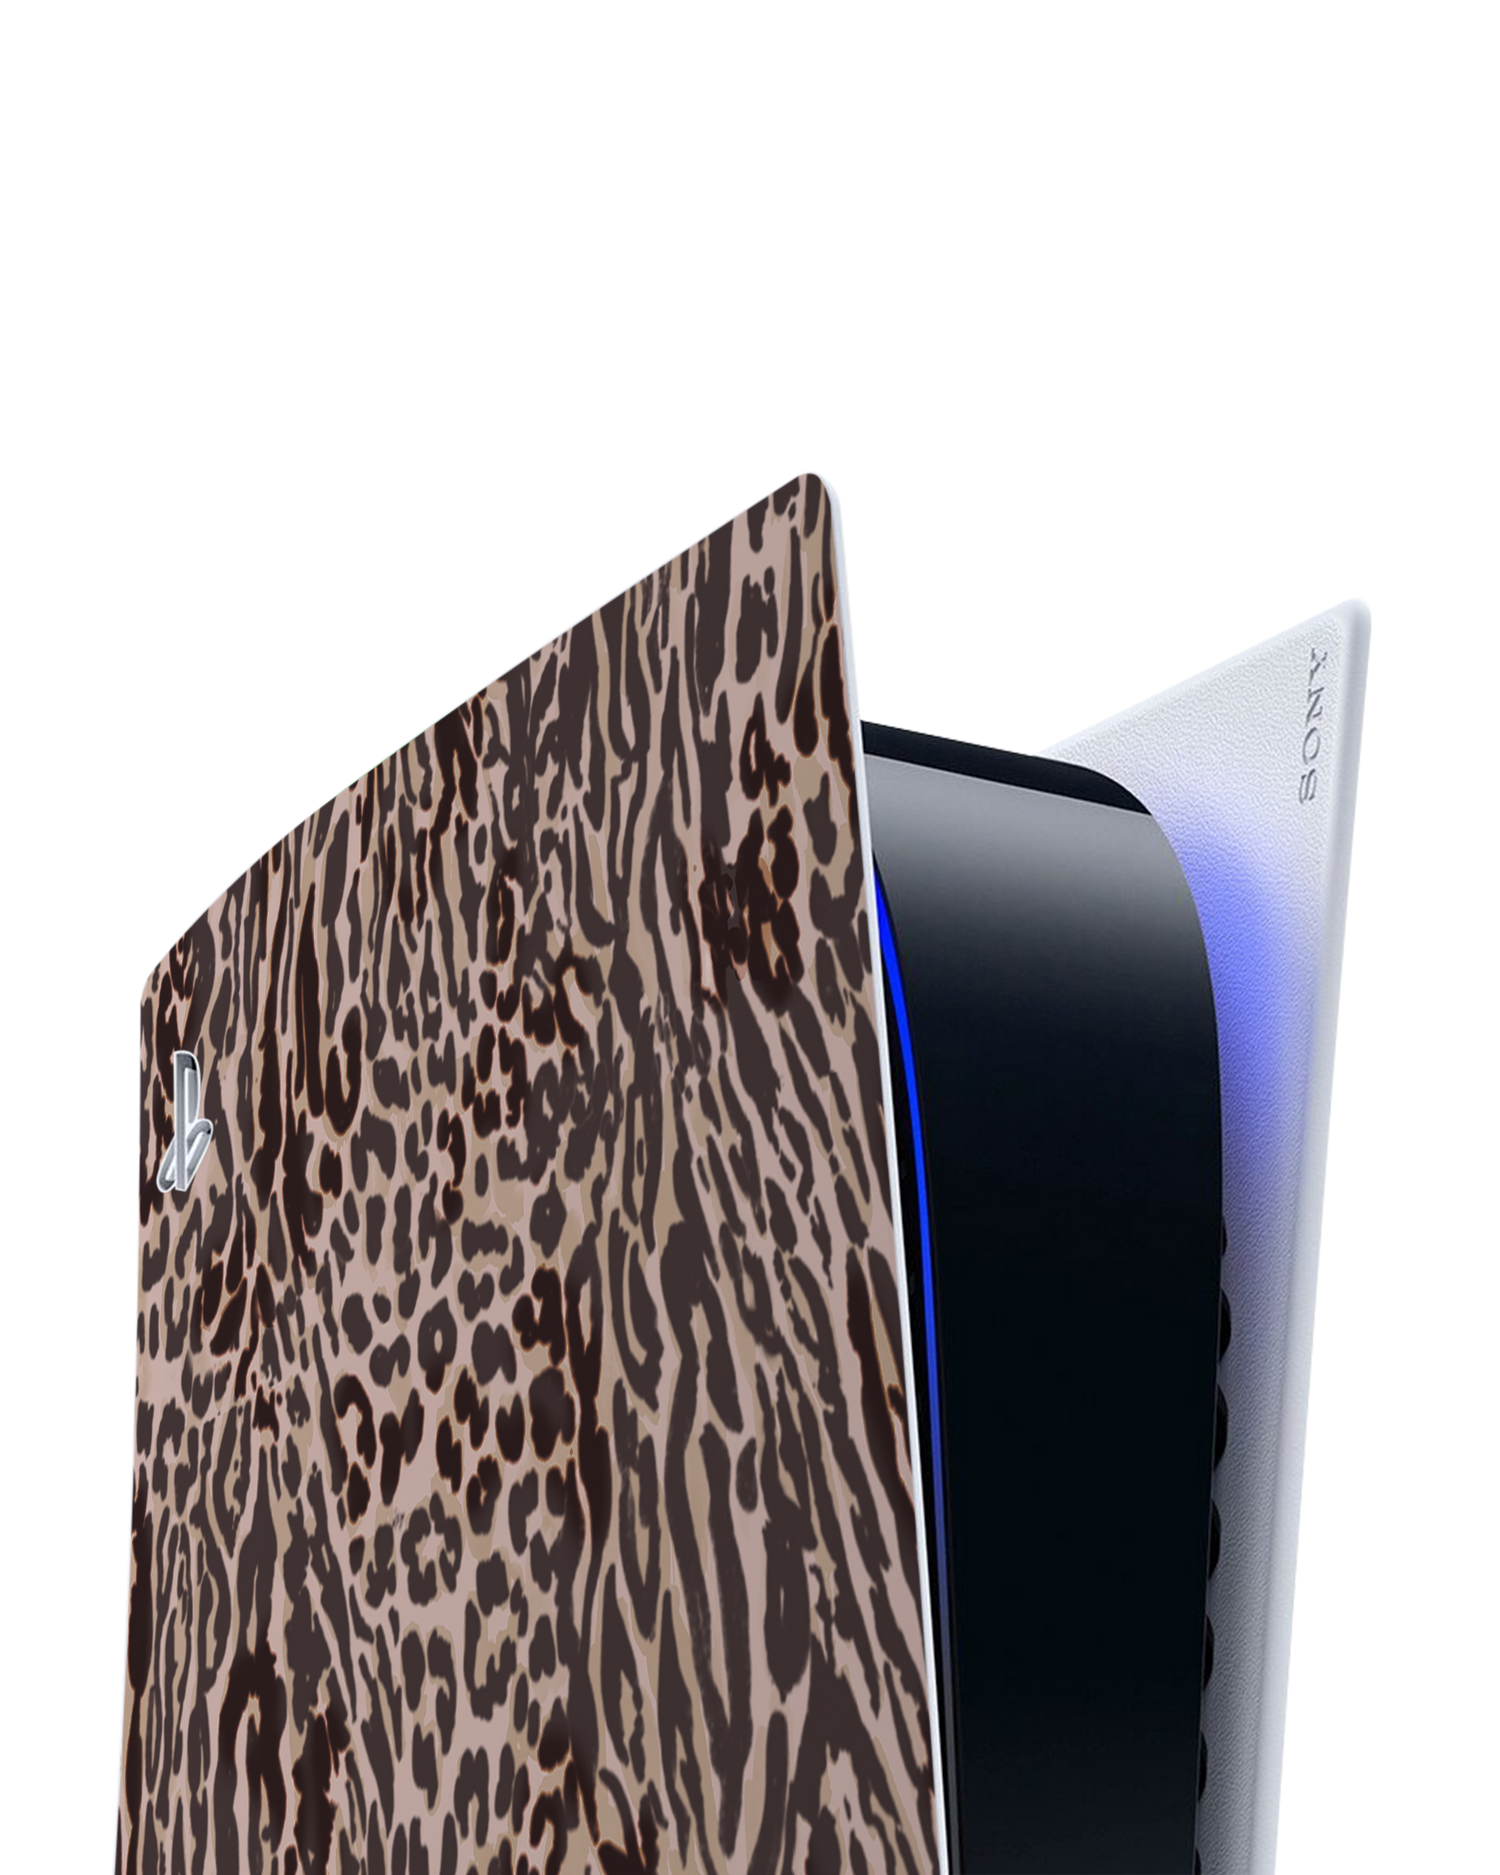 Animal Skin Tough Love Console Skin for Sony PlayStation 5: Detail shot